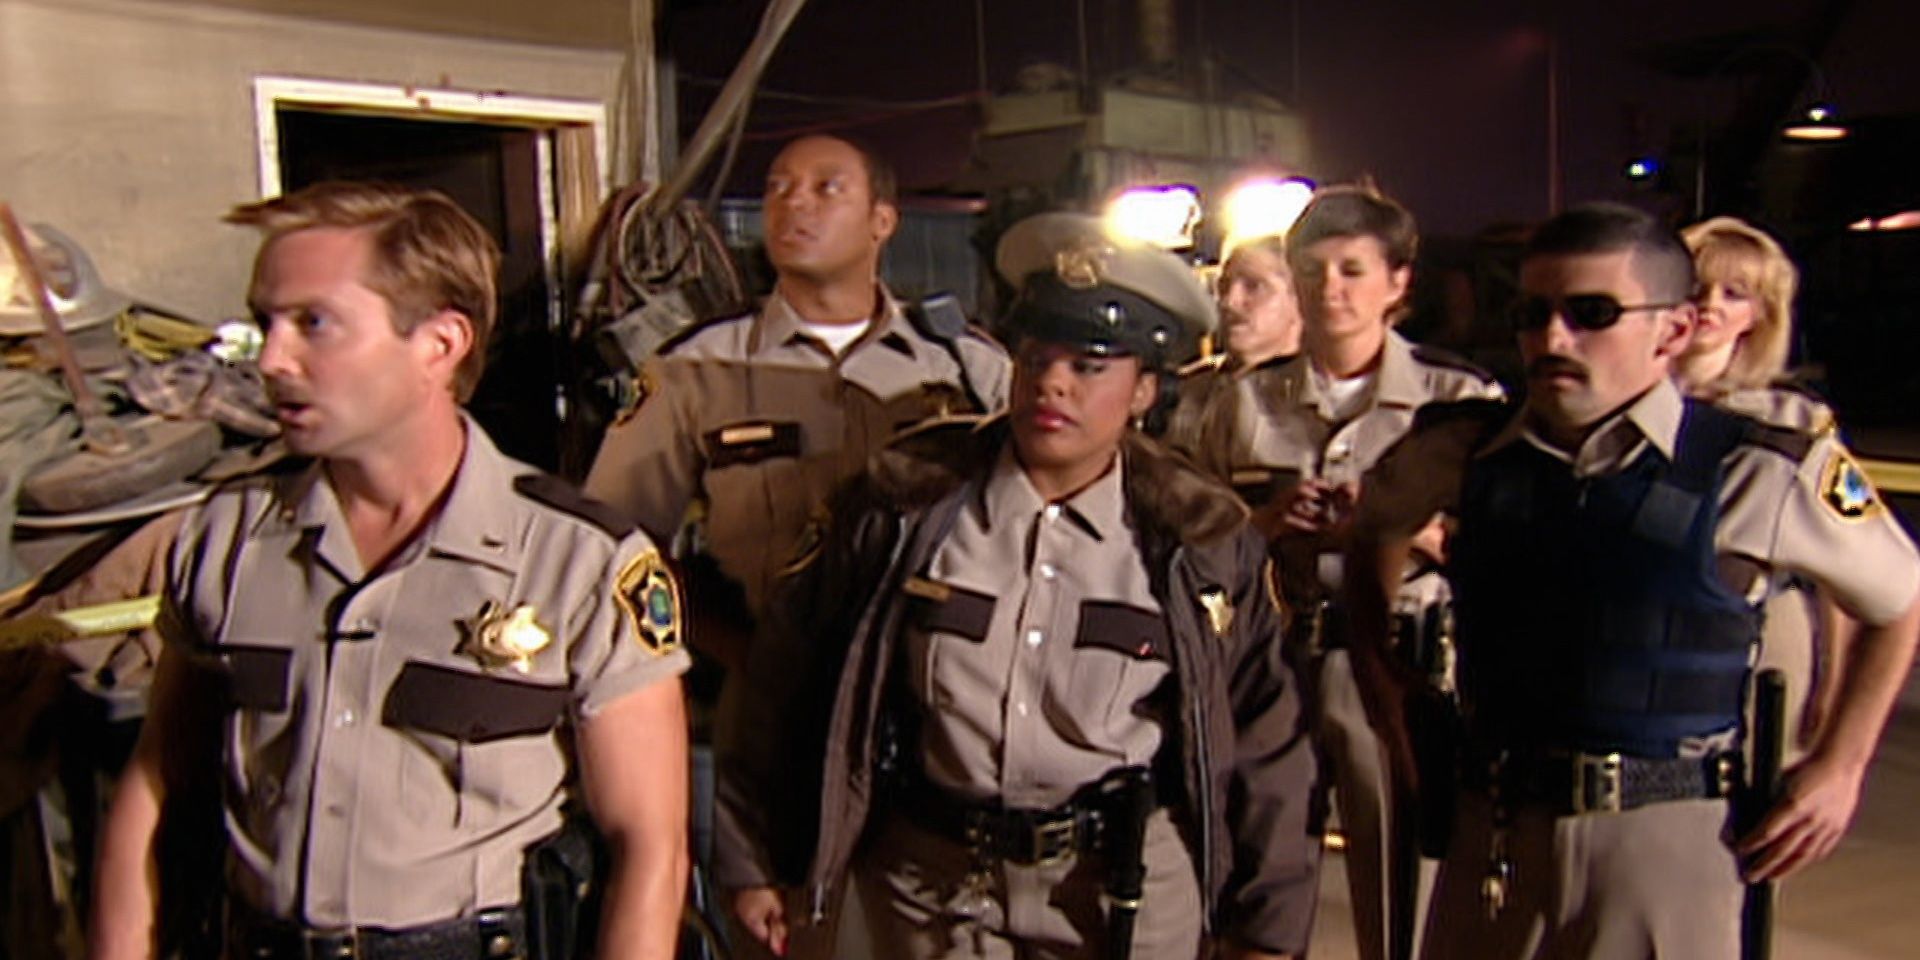 The cast of Reno 911 looking surprised